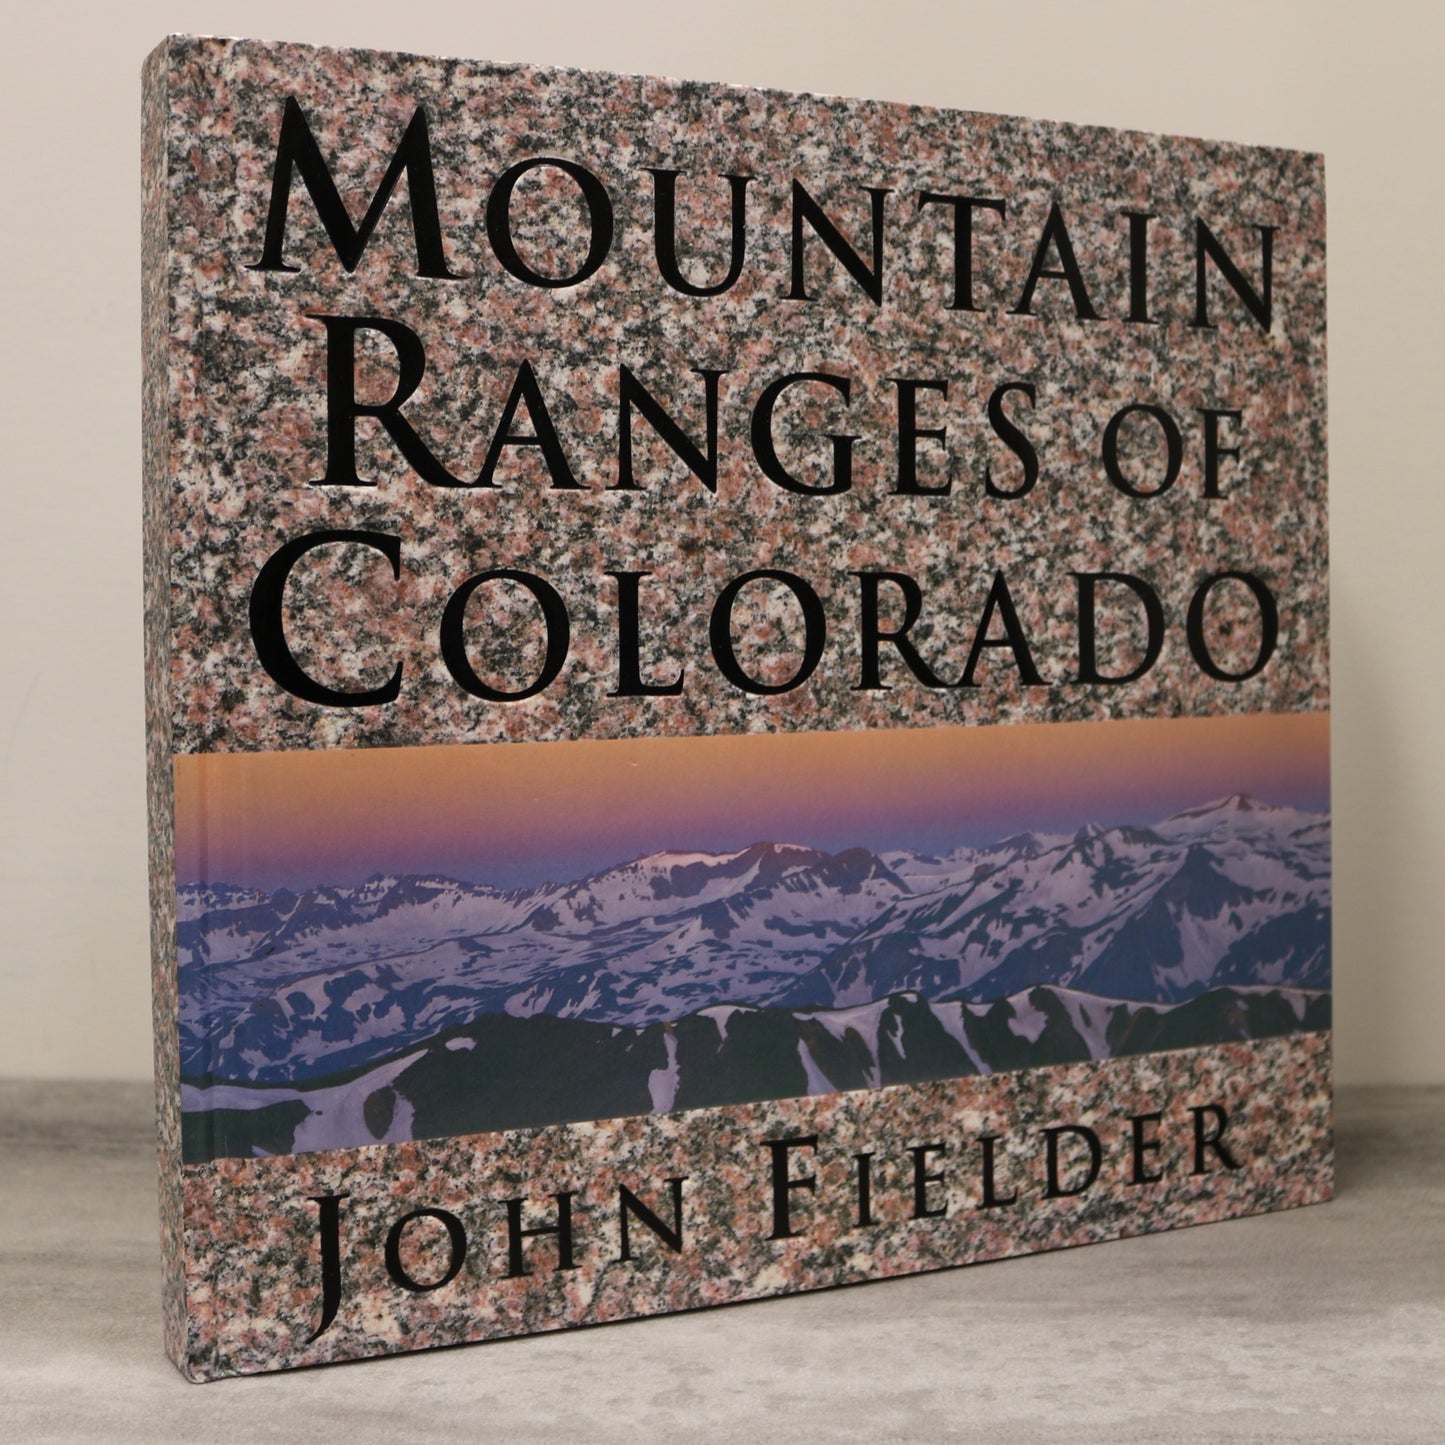 Mountain Ranges Colorado John Fielder Photography Landscapes Used Book